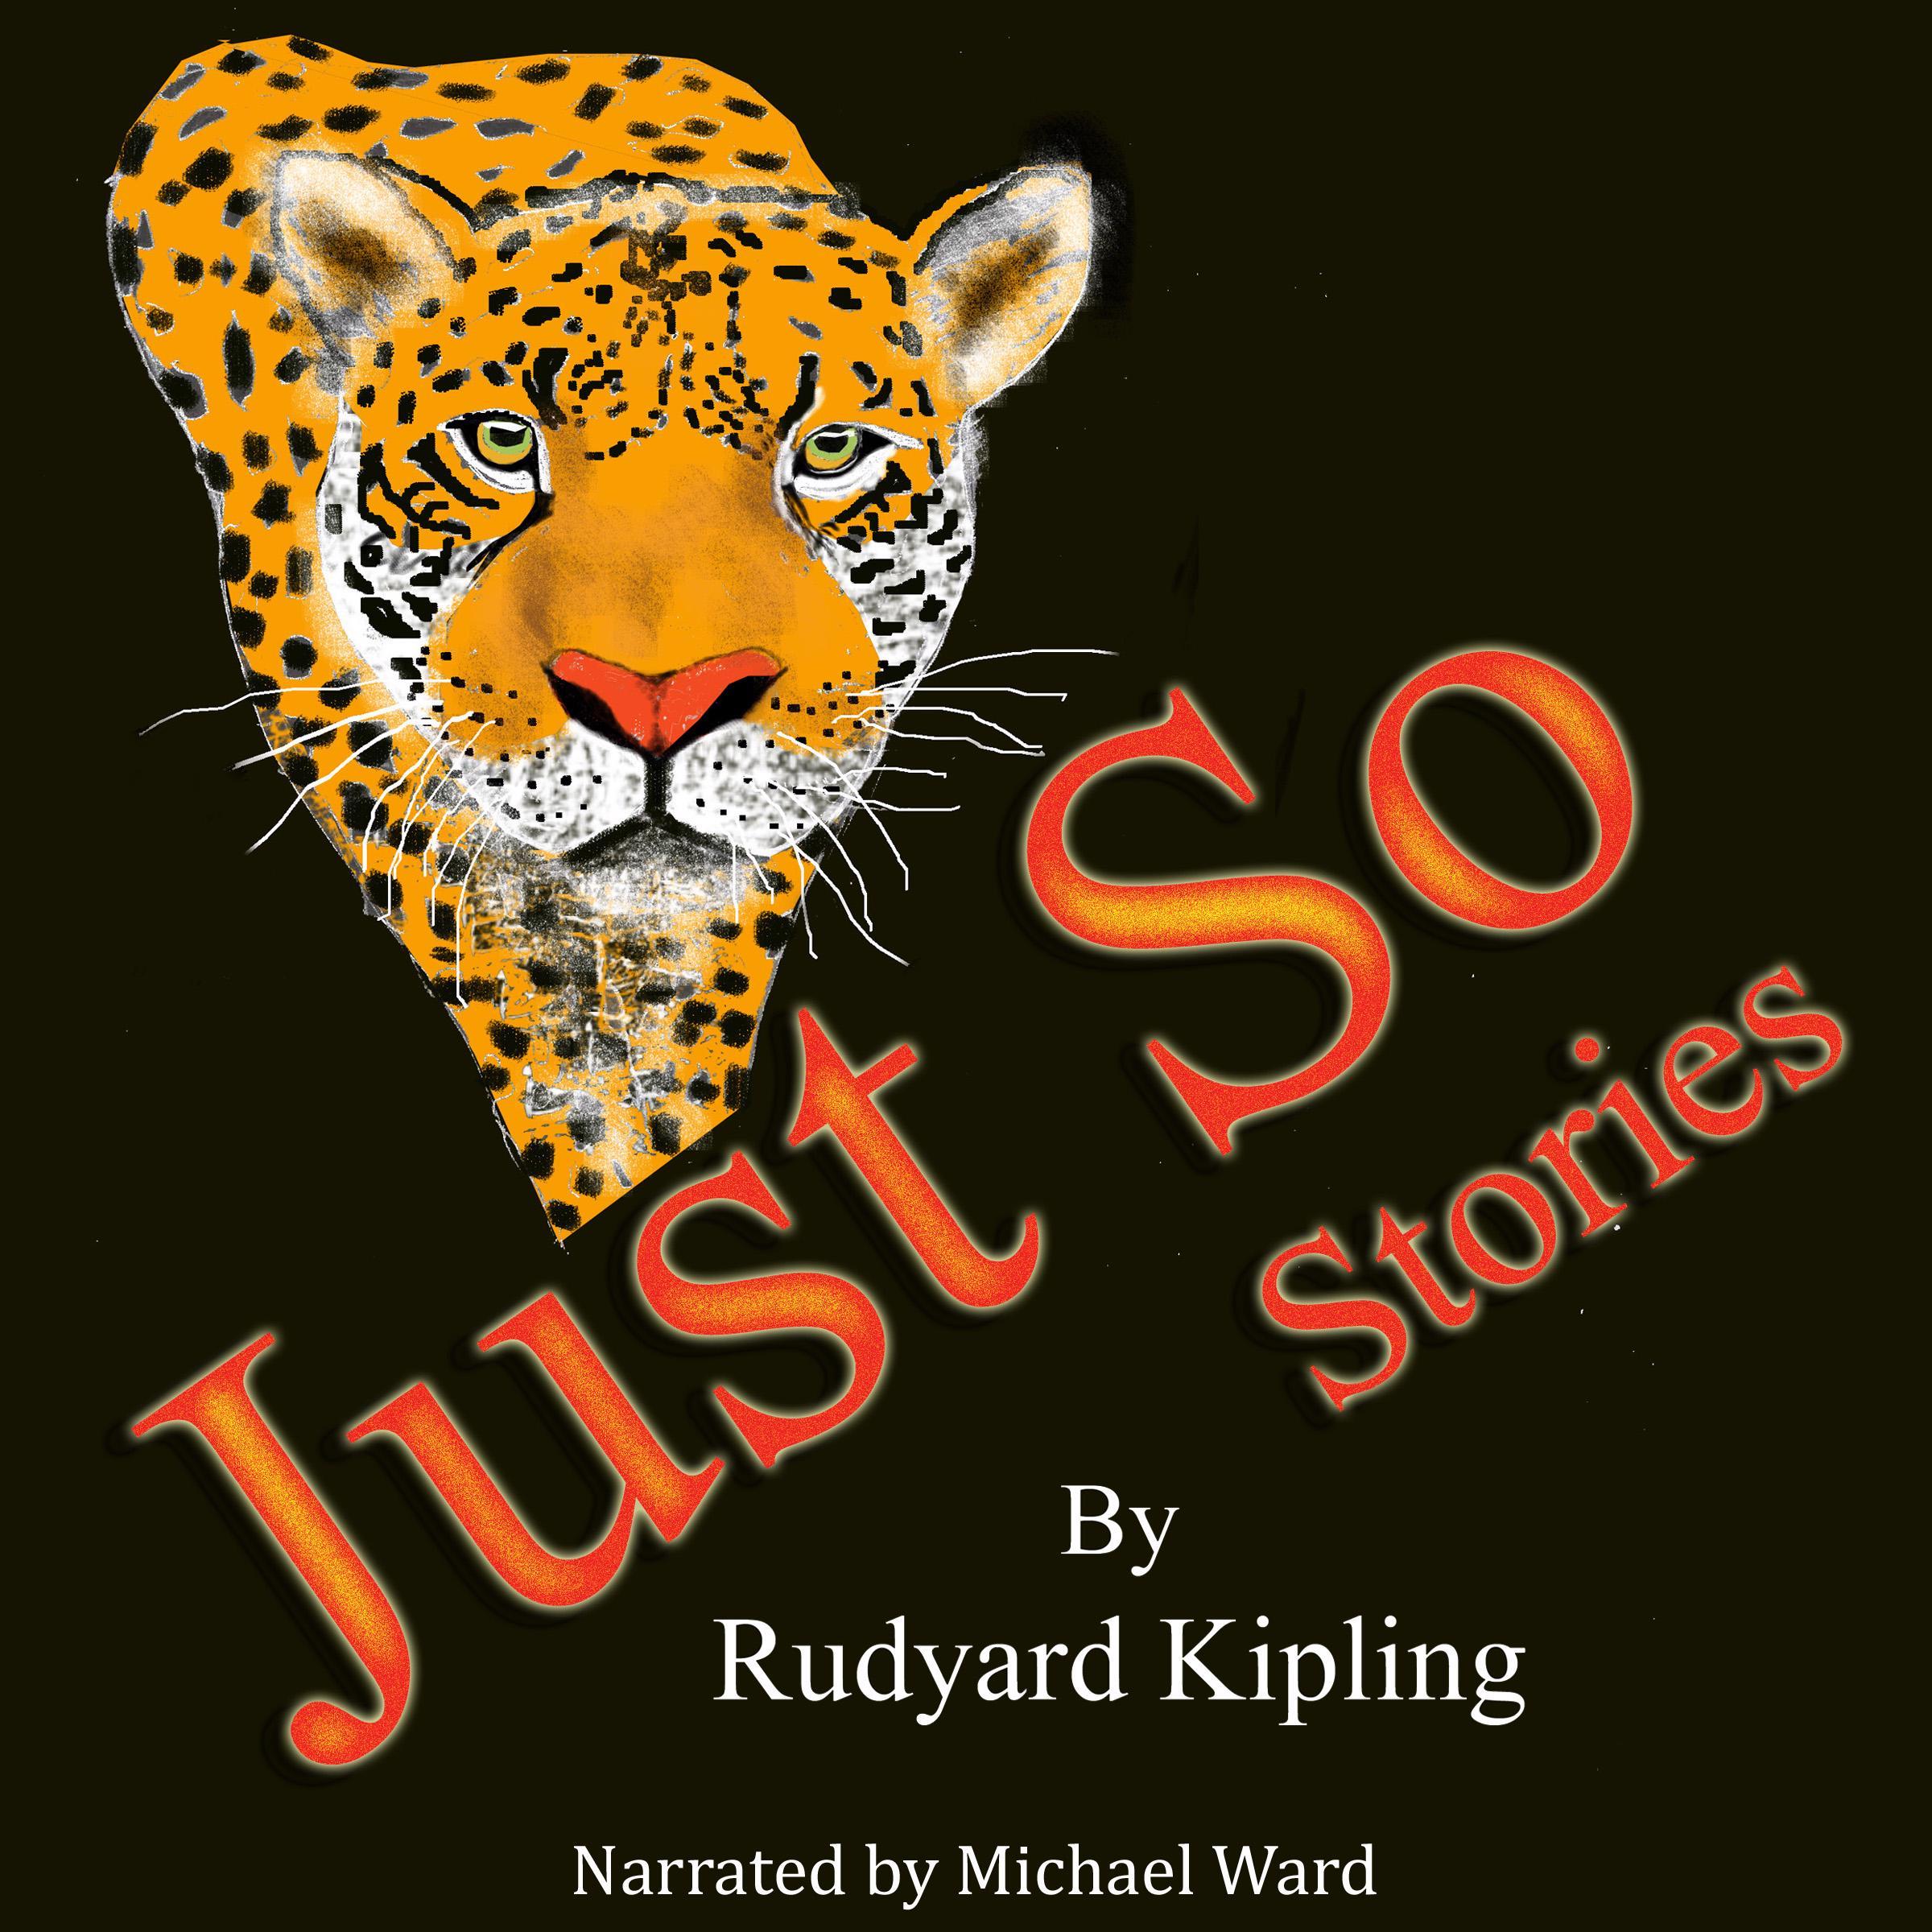 The Just So Stories